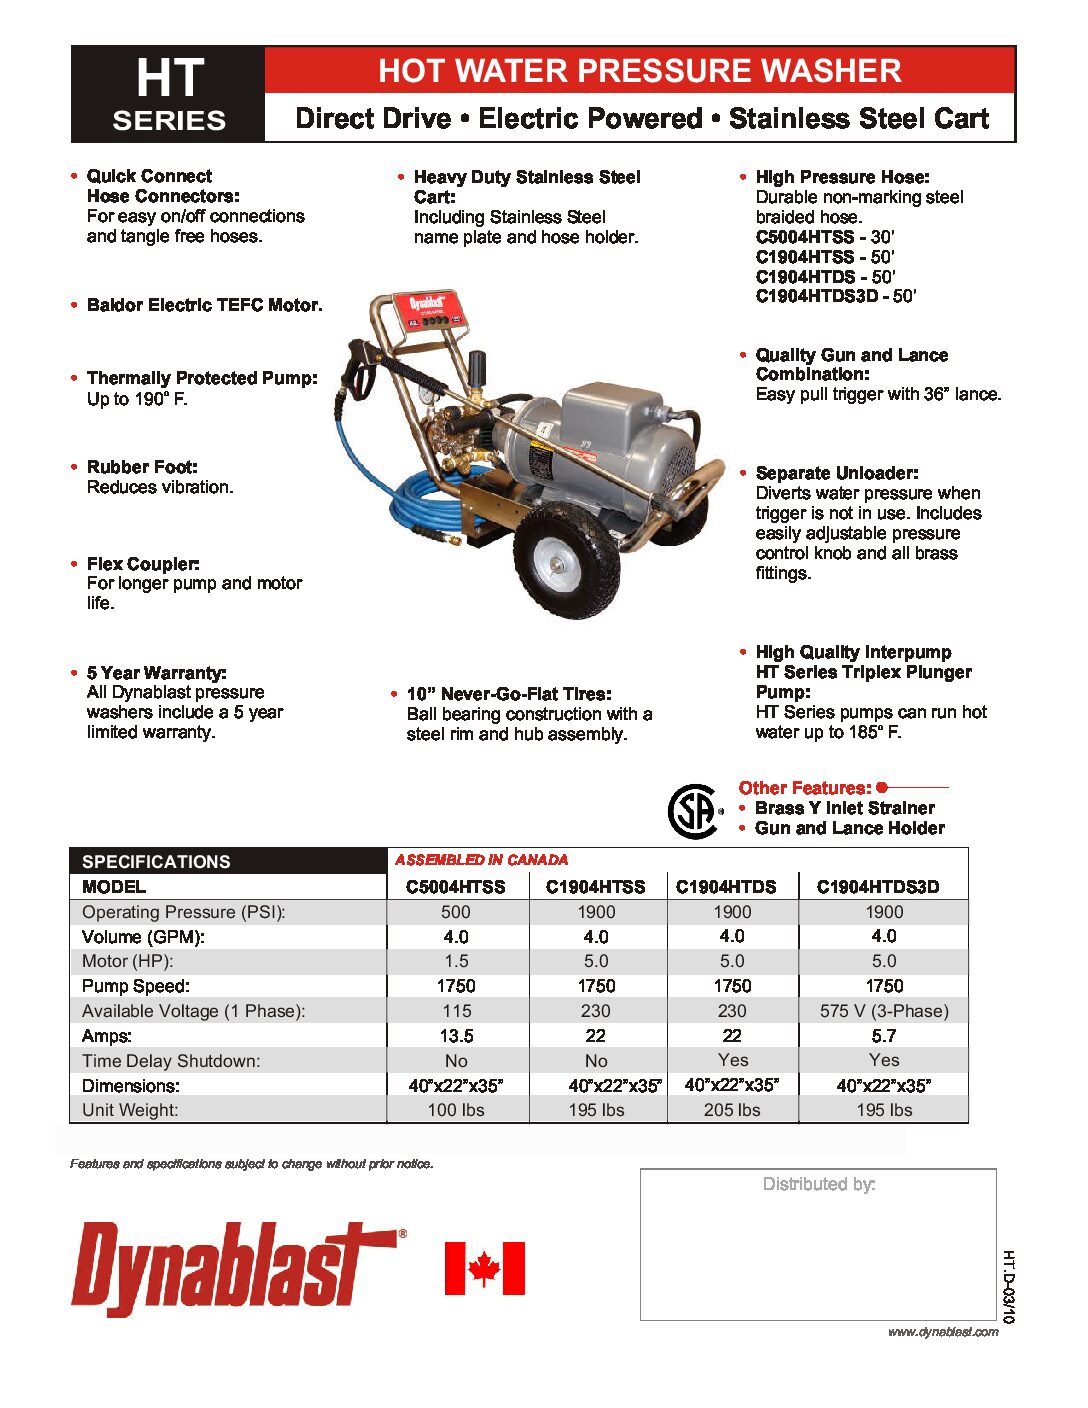 Dynablast C5004HTDS Cold & Hot Water Pressure Washer - English